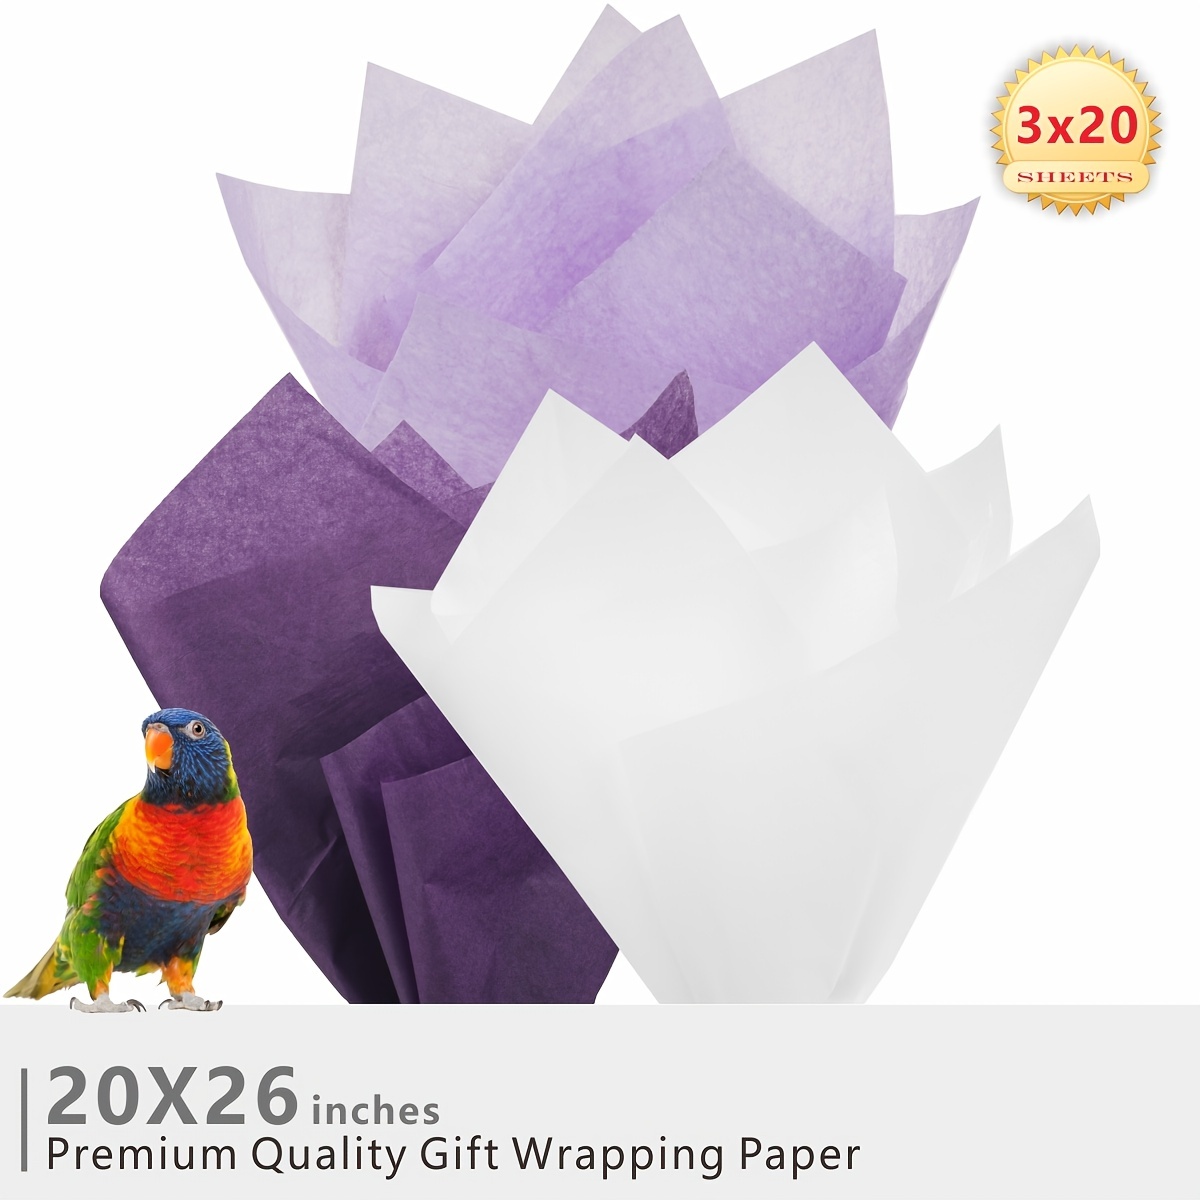 High-Quality Blue Mylar Tissue Paper 20x26 - Pack of 3 Sheets